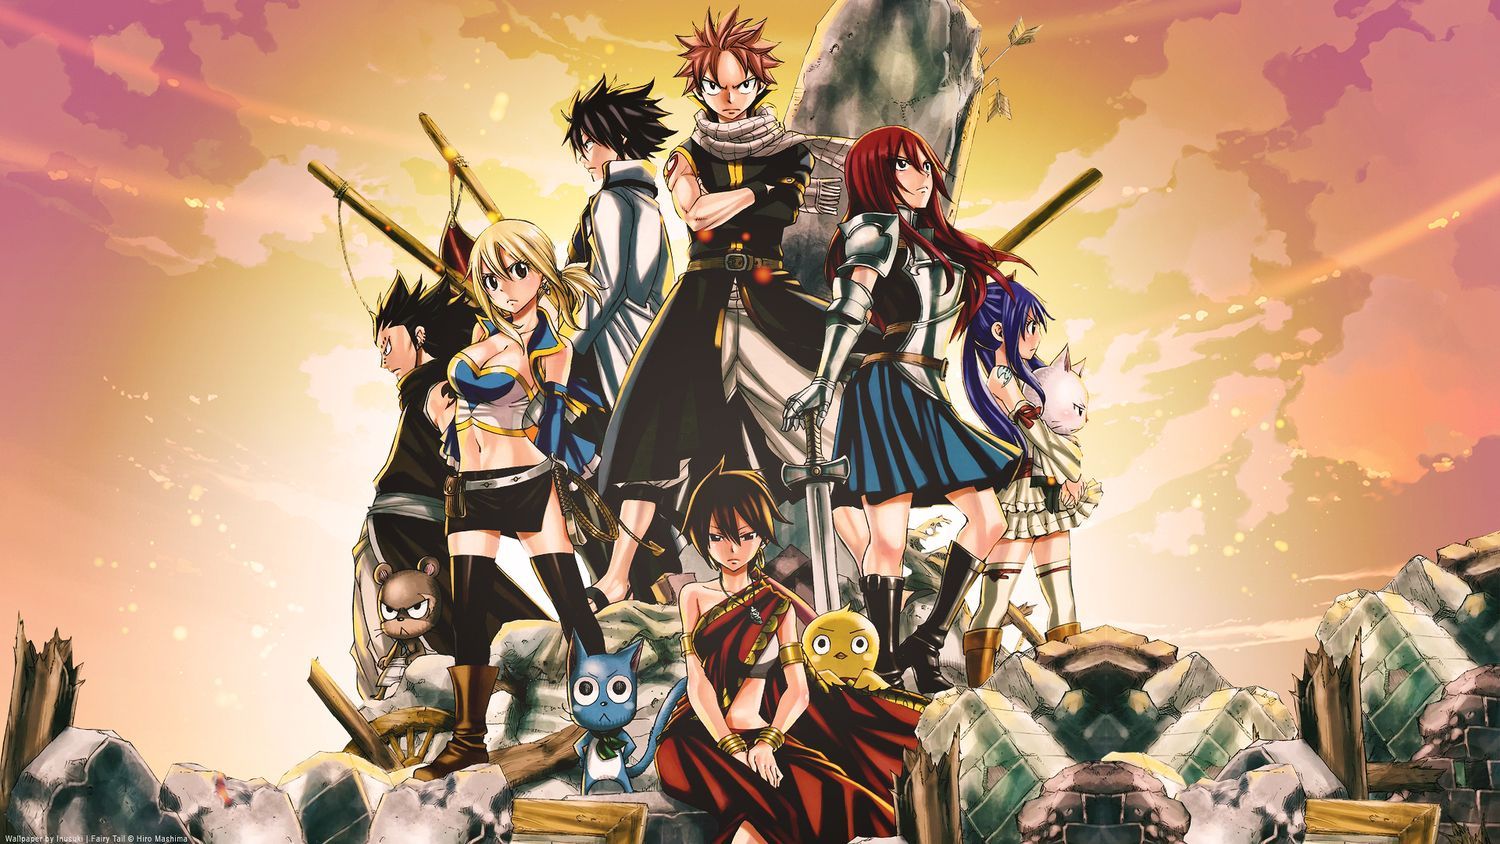 Fairytail Anime Wallpapers